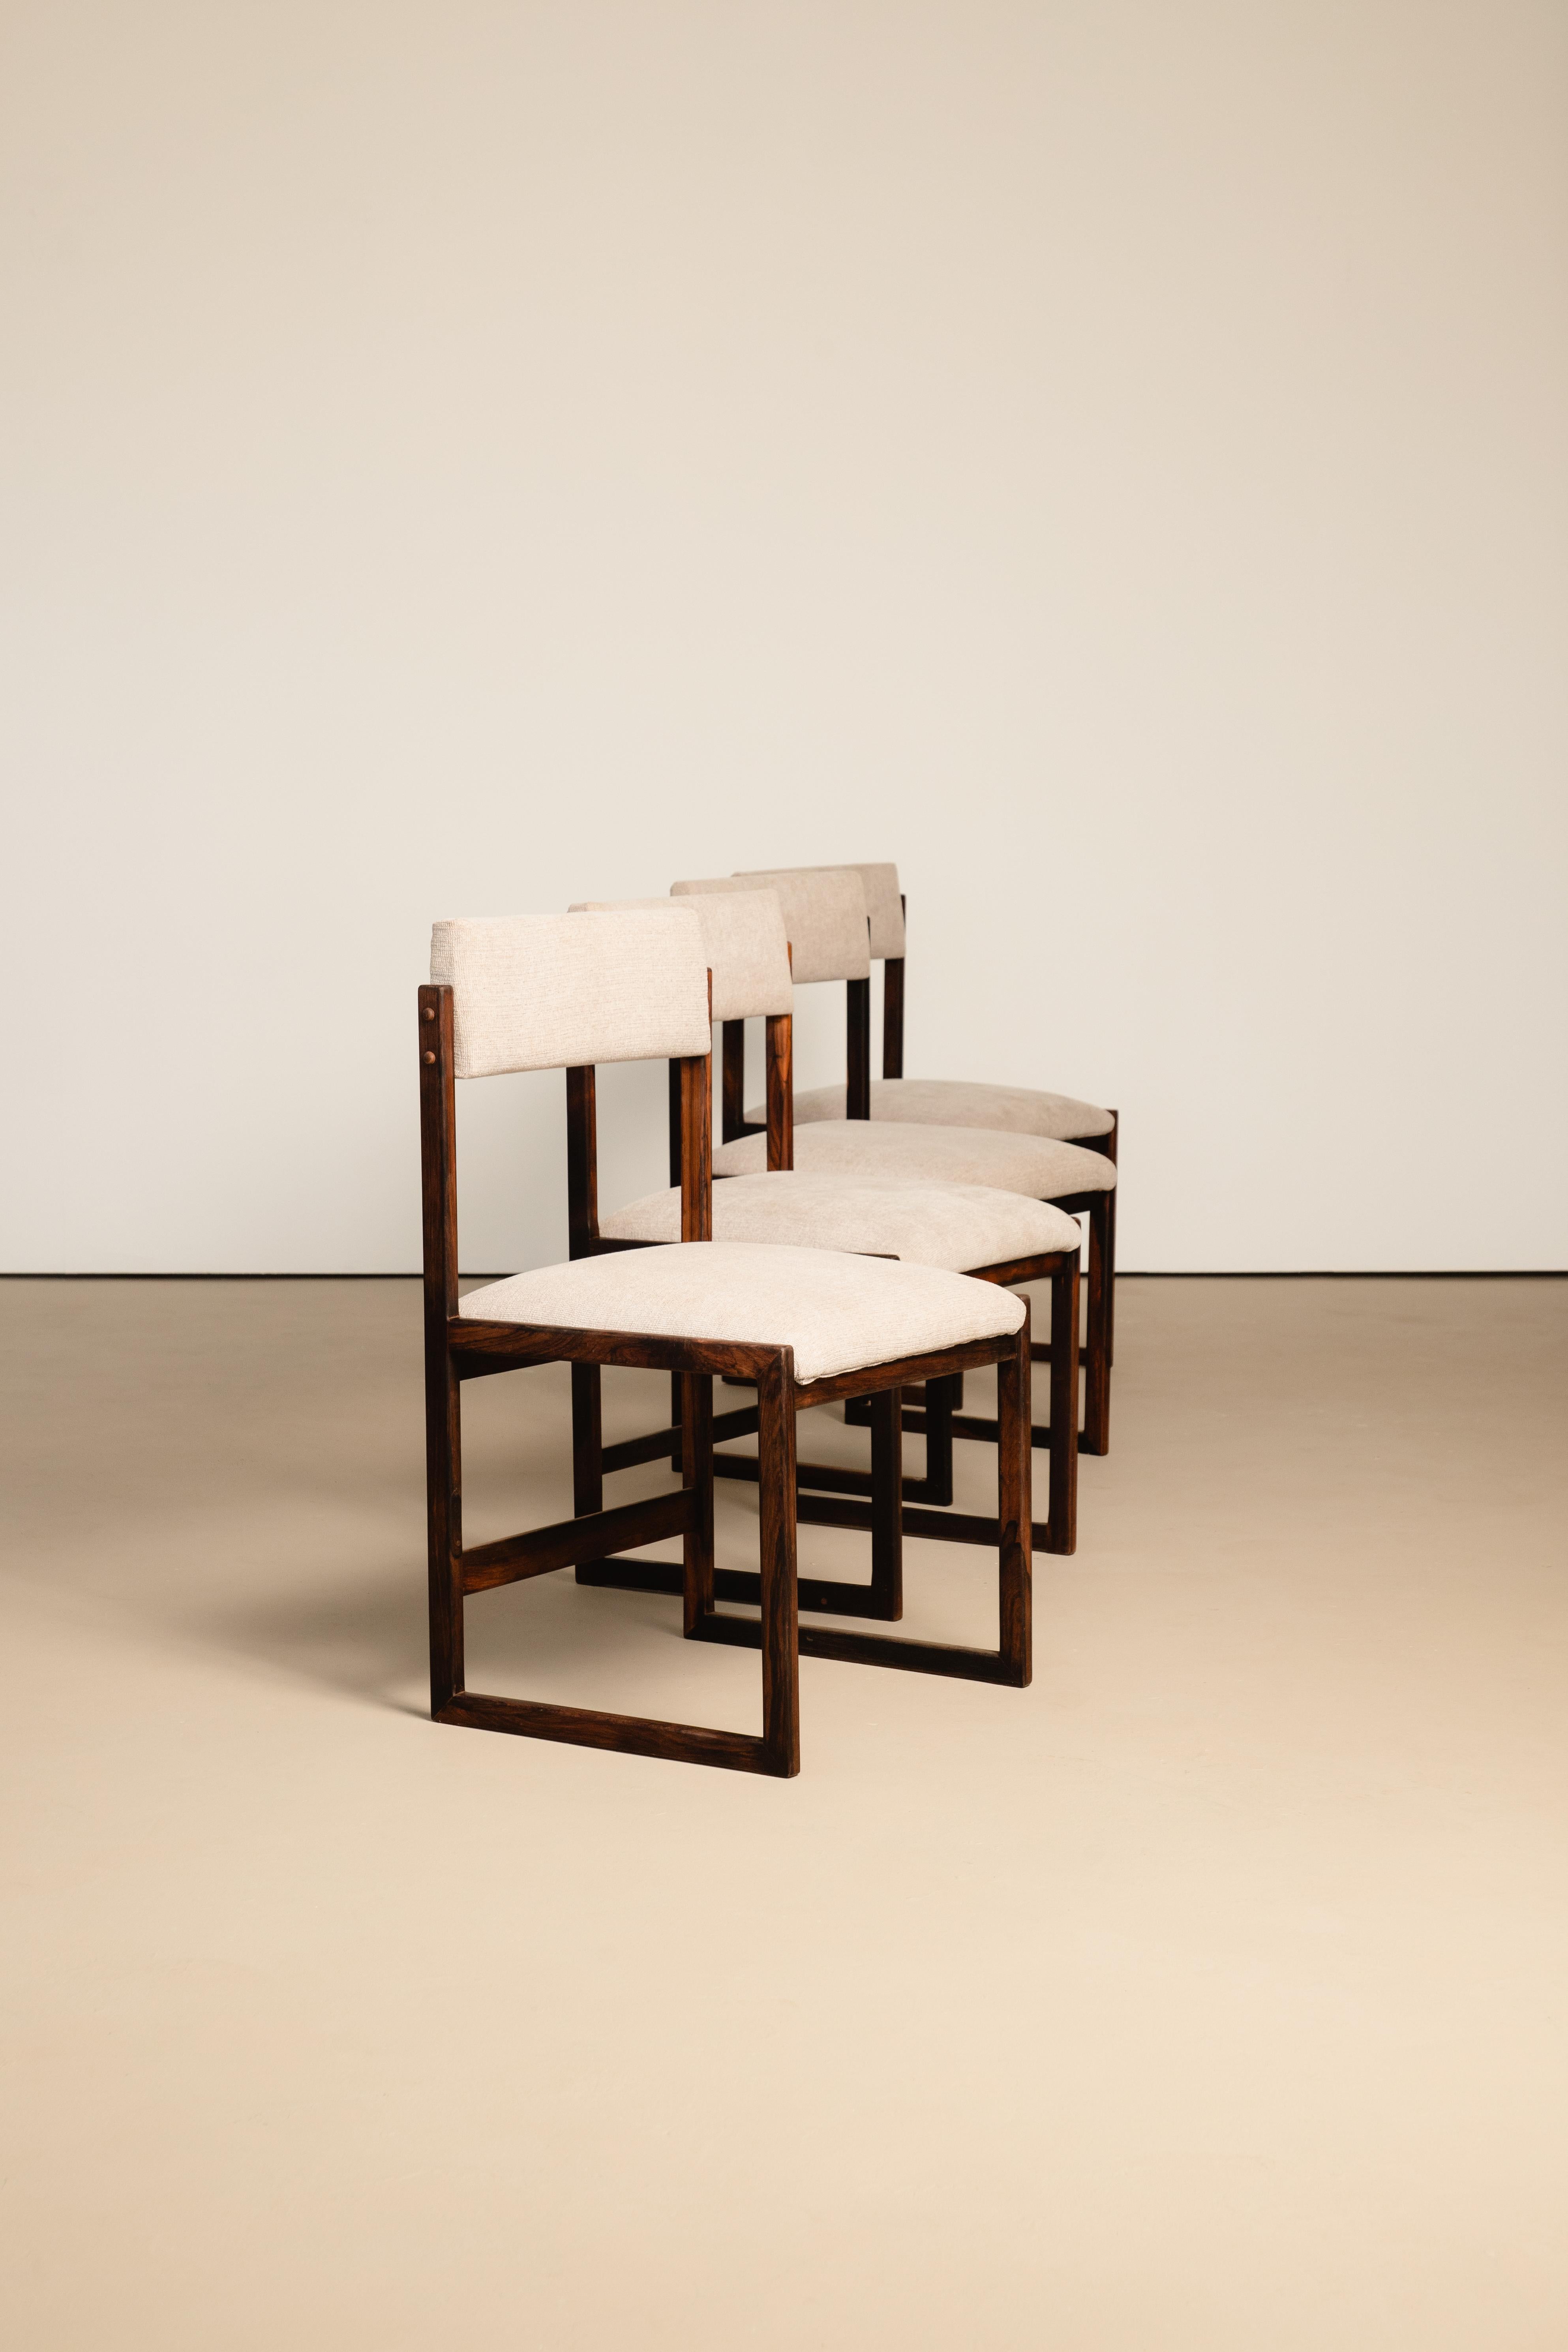 Set of upholstered chairs with solid rosewood structure by Fátima Arquitetura e Interiores (FAI). One of them retains a seal. Created in the 1960's by architects Guilherme Nunes and Sávio Visconti in Rio de Janeiro, Fátima Arquitetura e Interiores